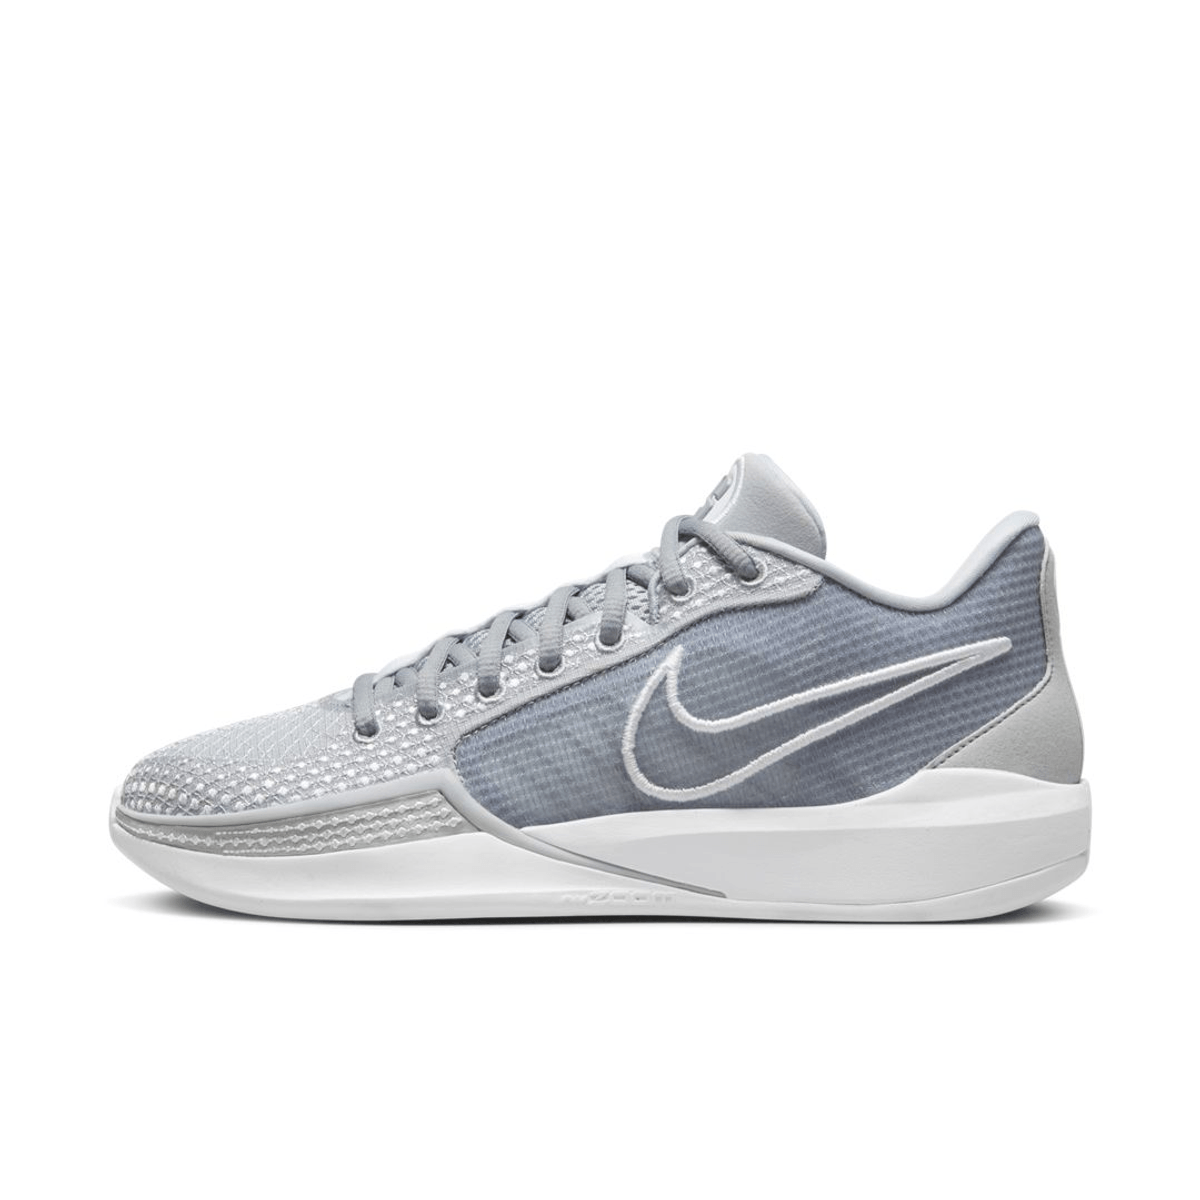 The Nike Sabrina 1 “Wolf Grey” Releases This Fall